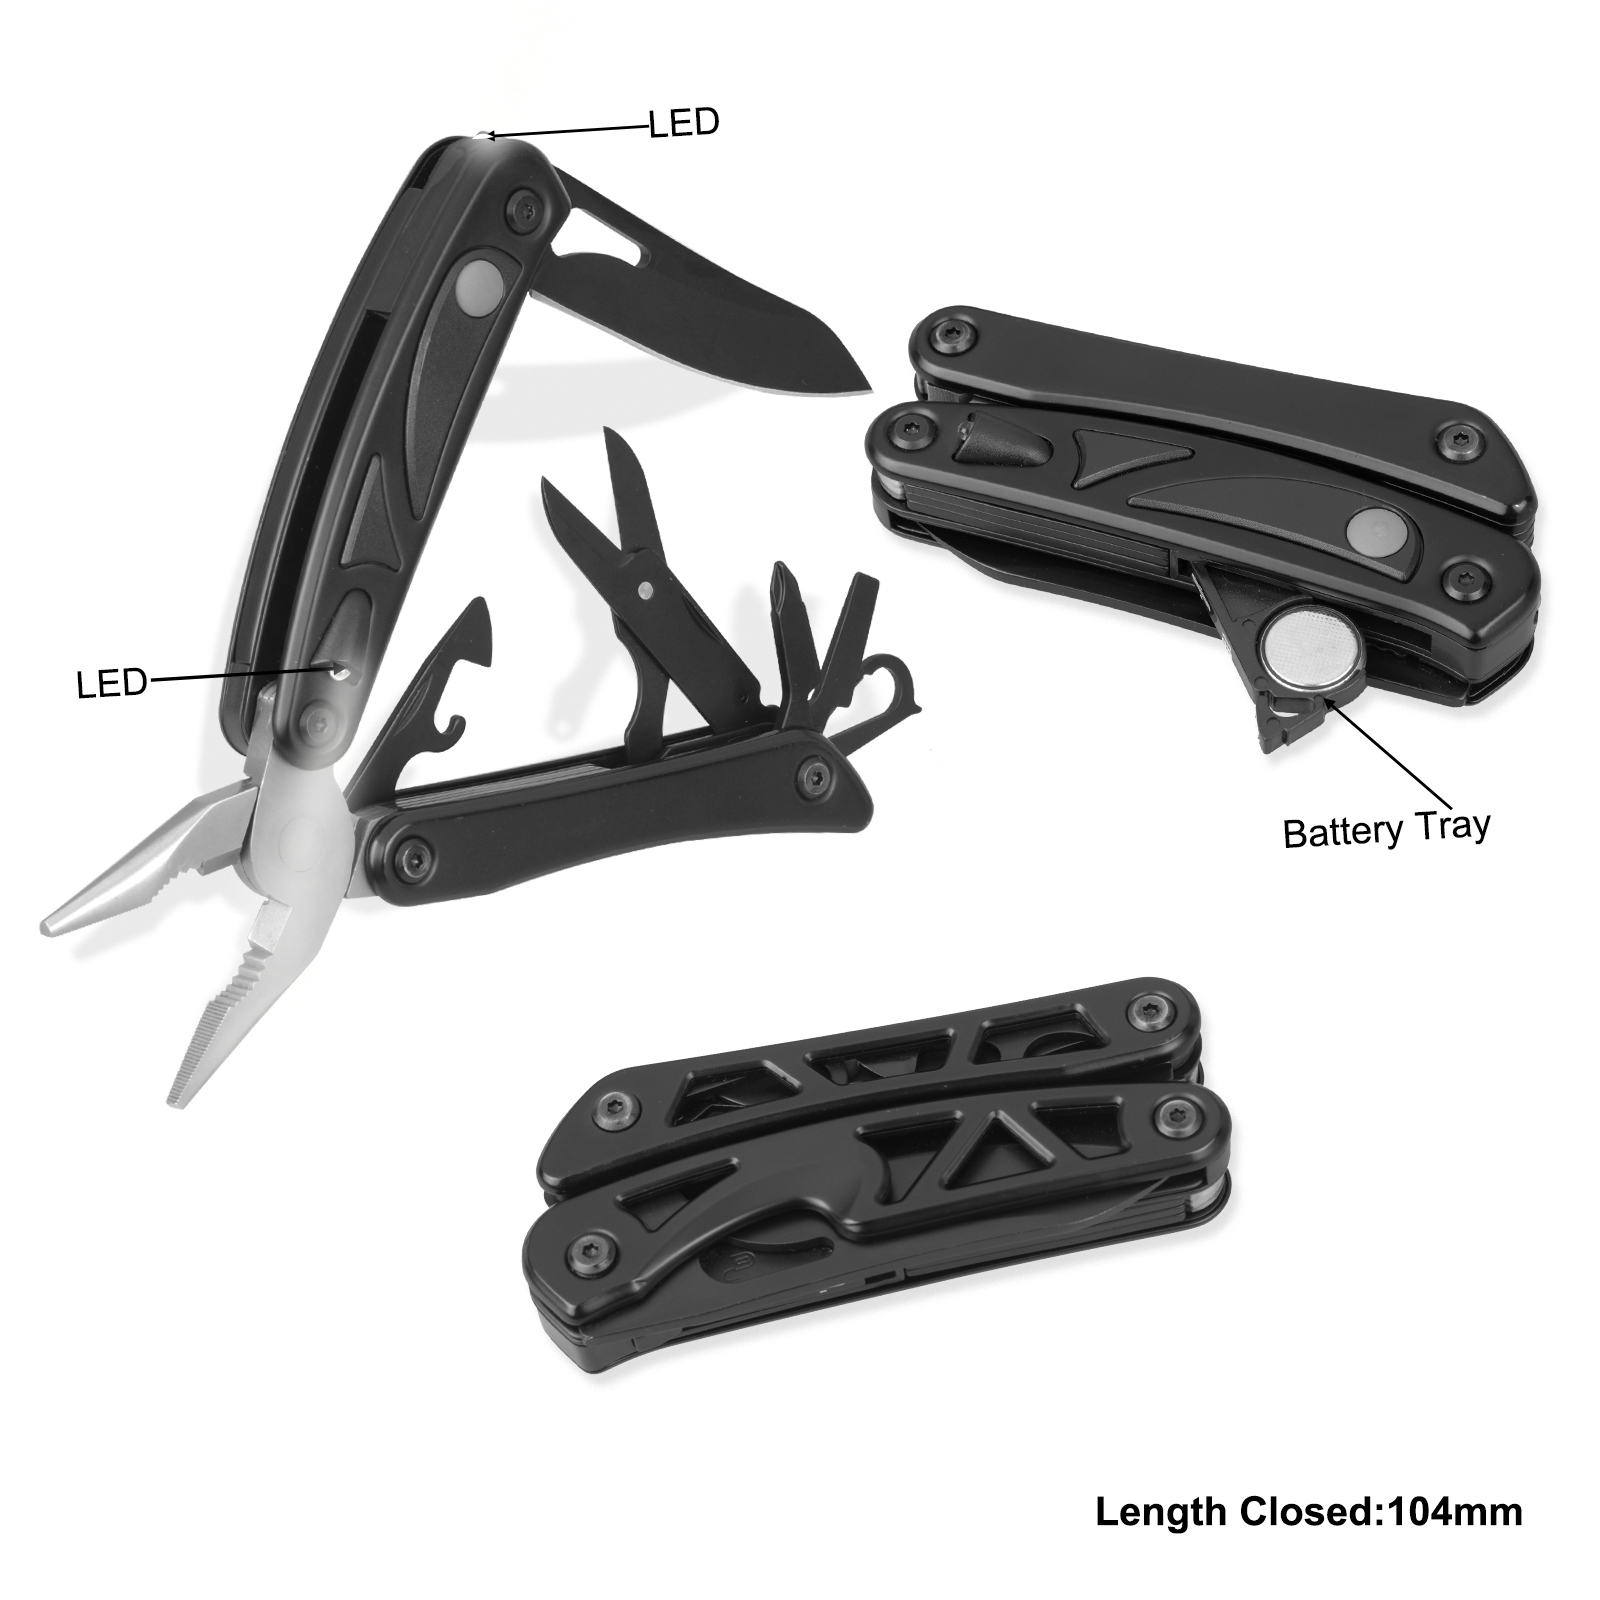 #8146 Top highest quality multi-fucntion tool with 2 LED